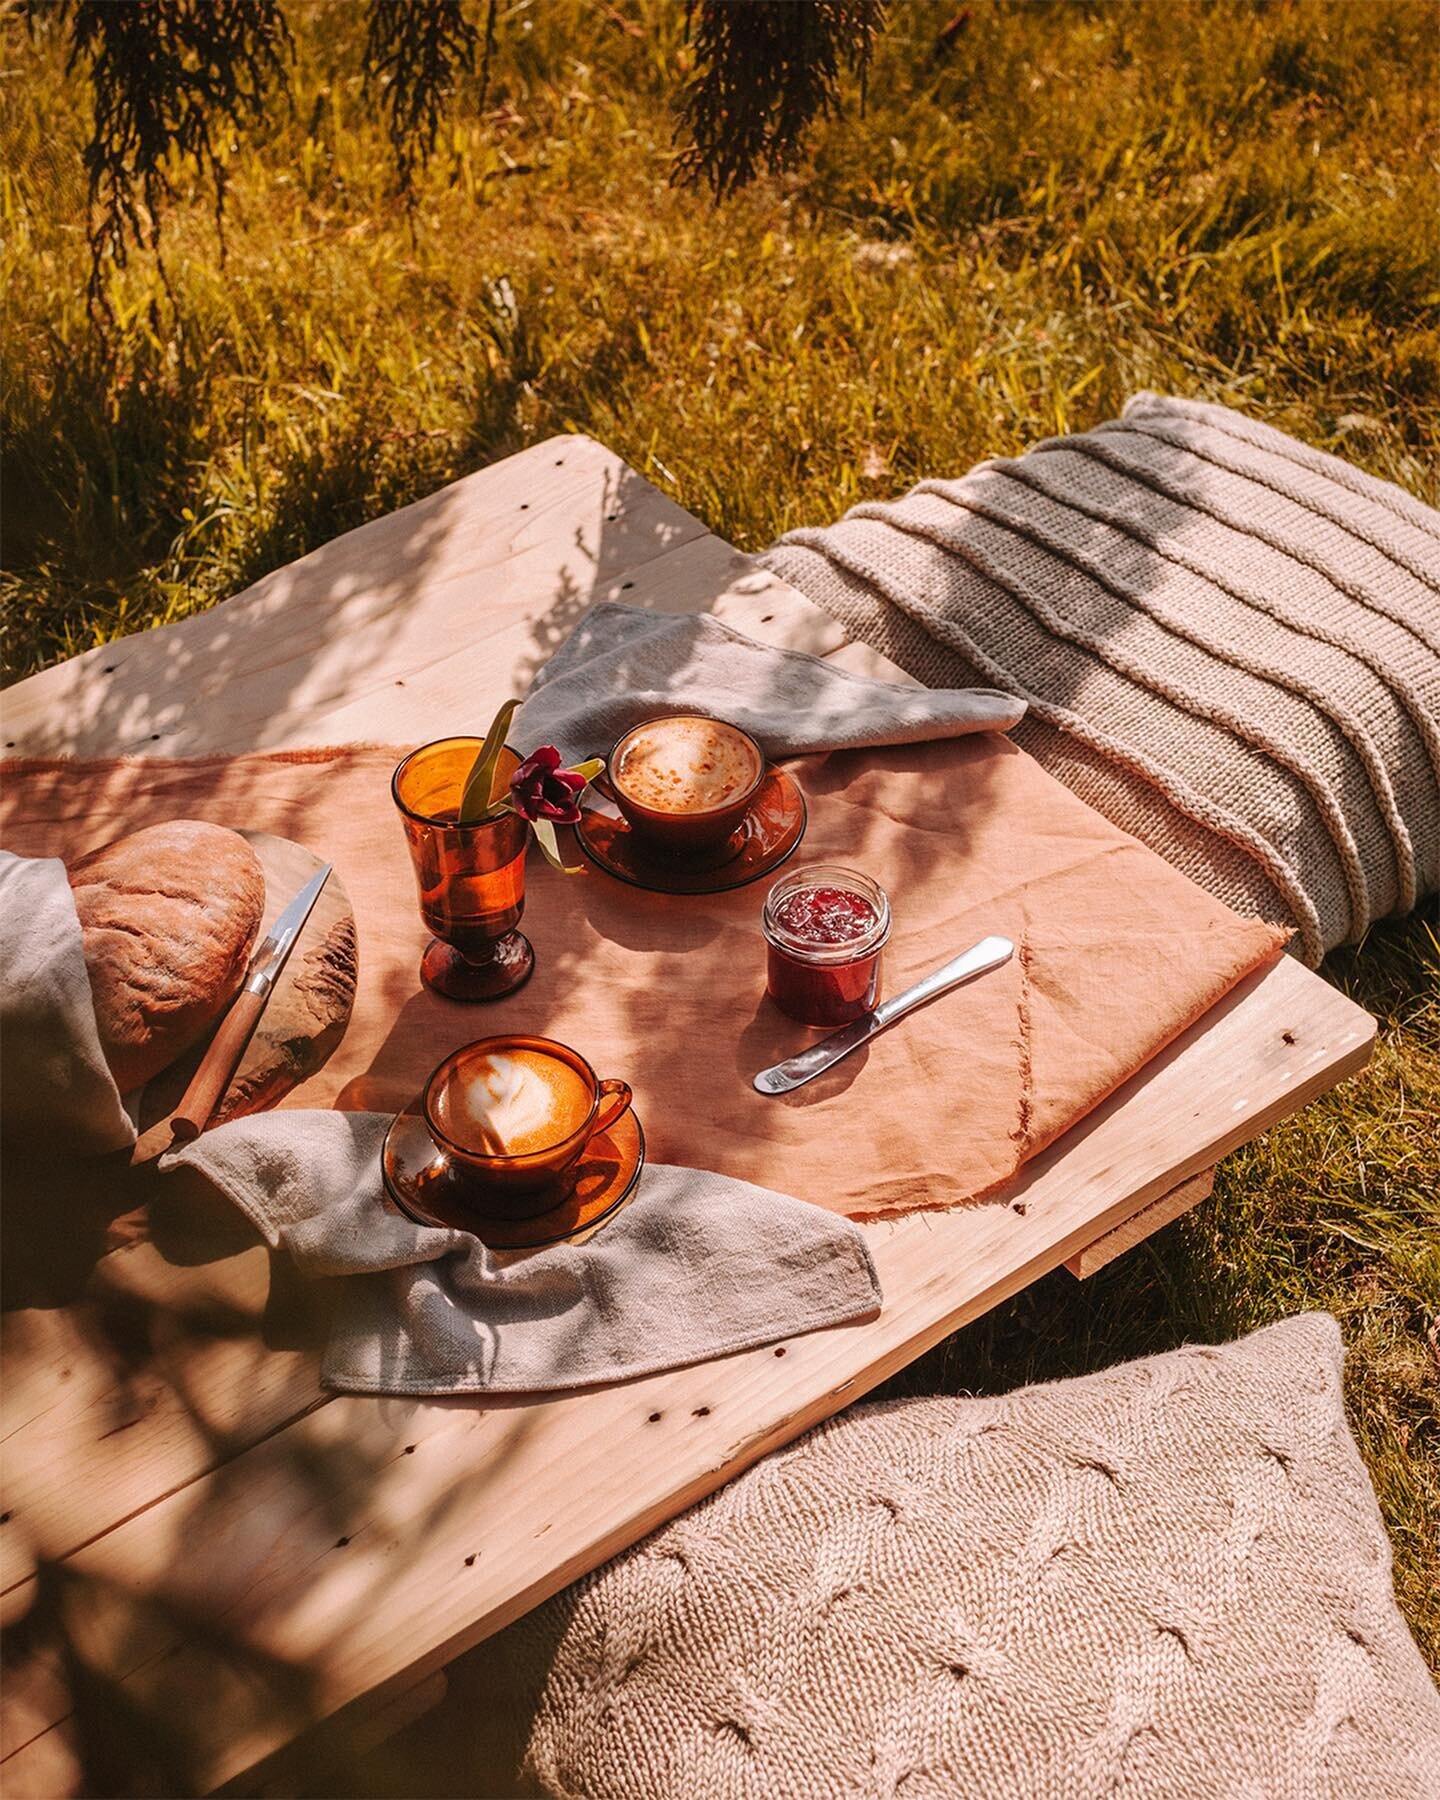 Is there still time to squeeze in a few summer picnics? 🌞
Collab with vintage homeware queens @casa_carrara 🧡

#secondhandseptember #casacarrara #relivinguk #vintagehomeware #summerpicnic #sustainableliving #lifestylephotography #slowlivingphotogra